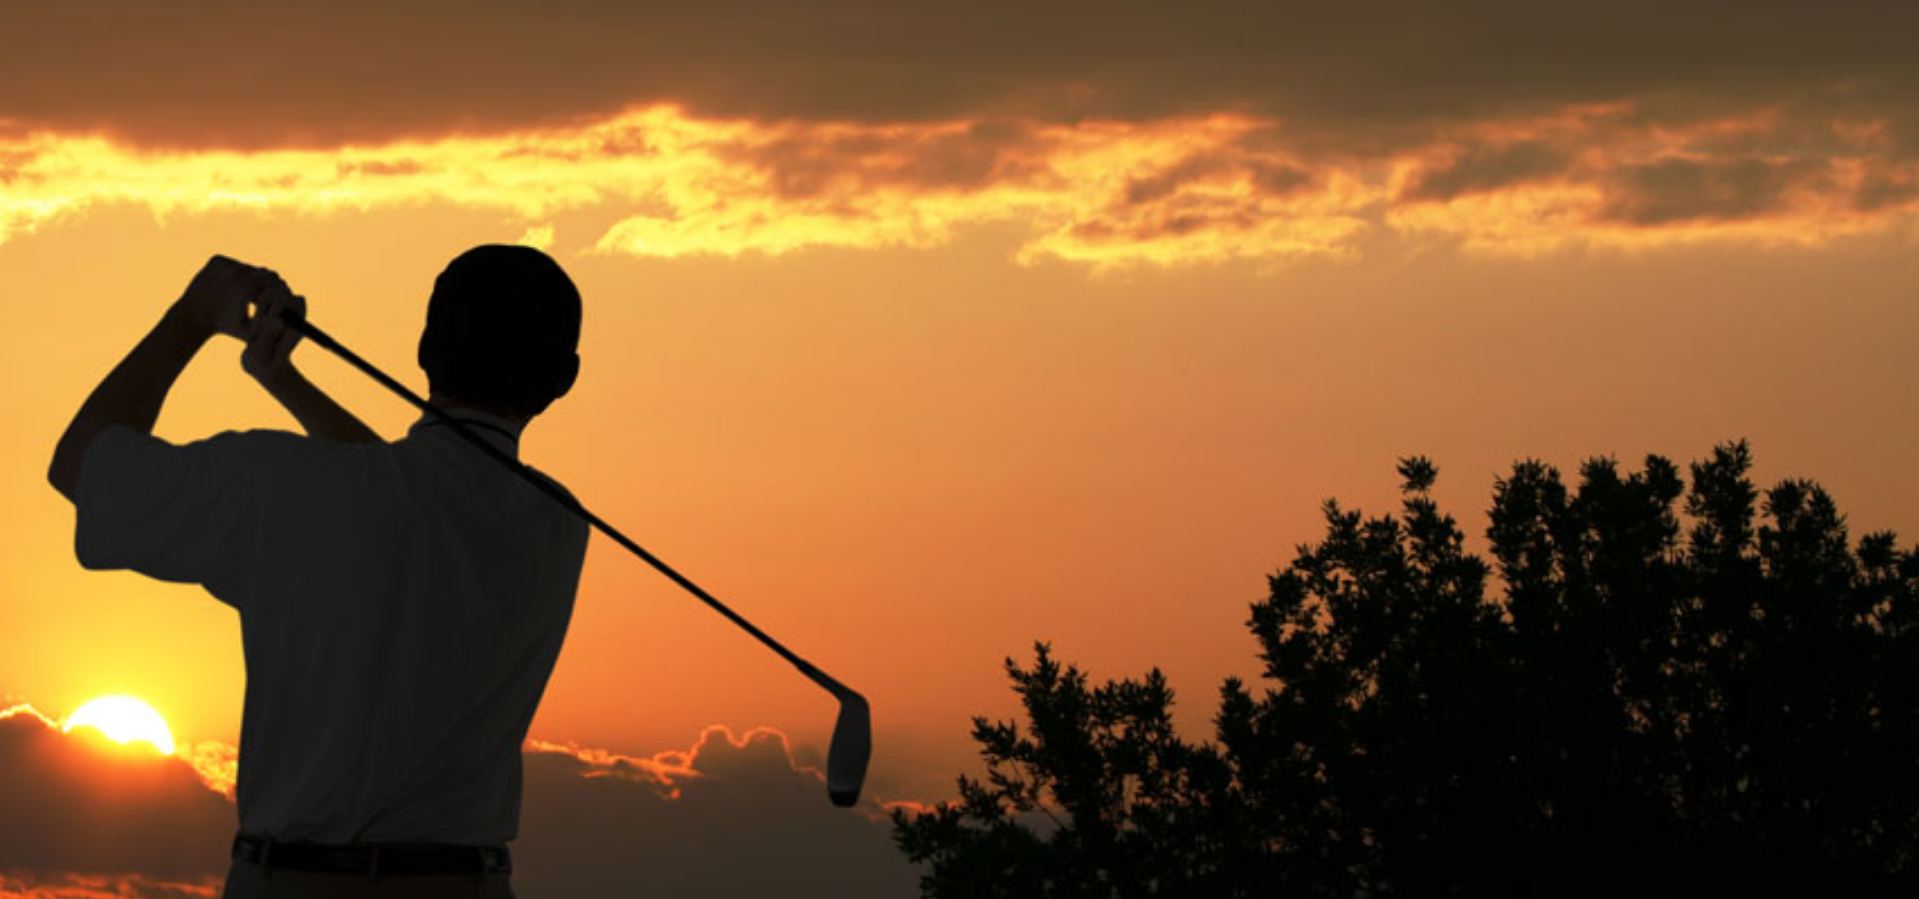 view of golfer at sunset